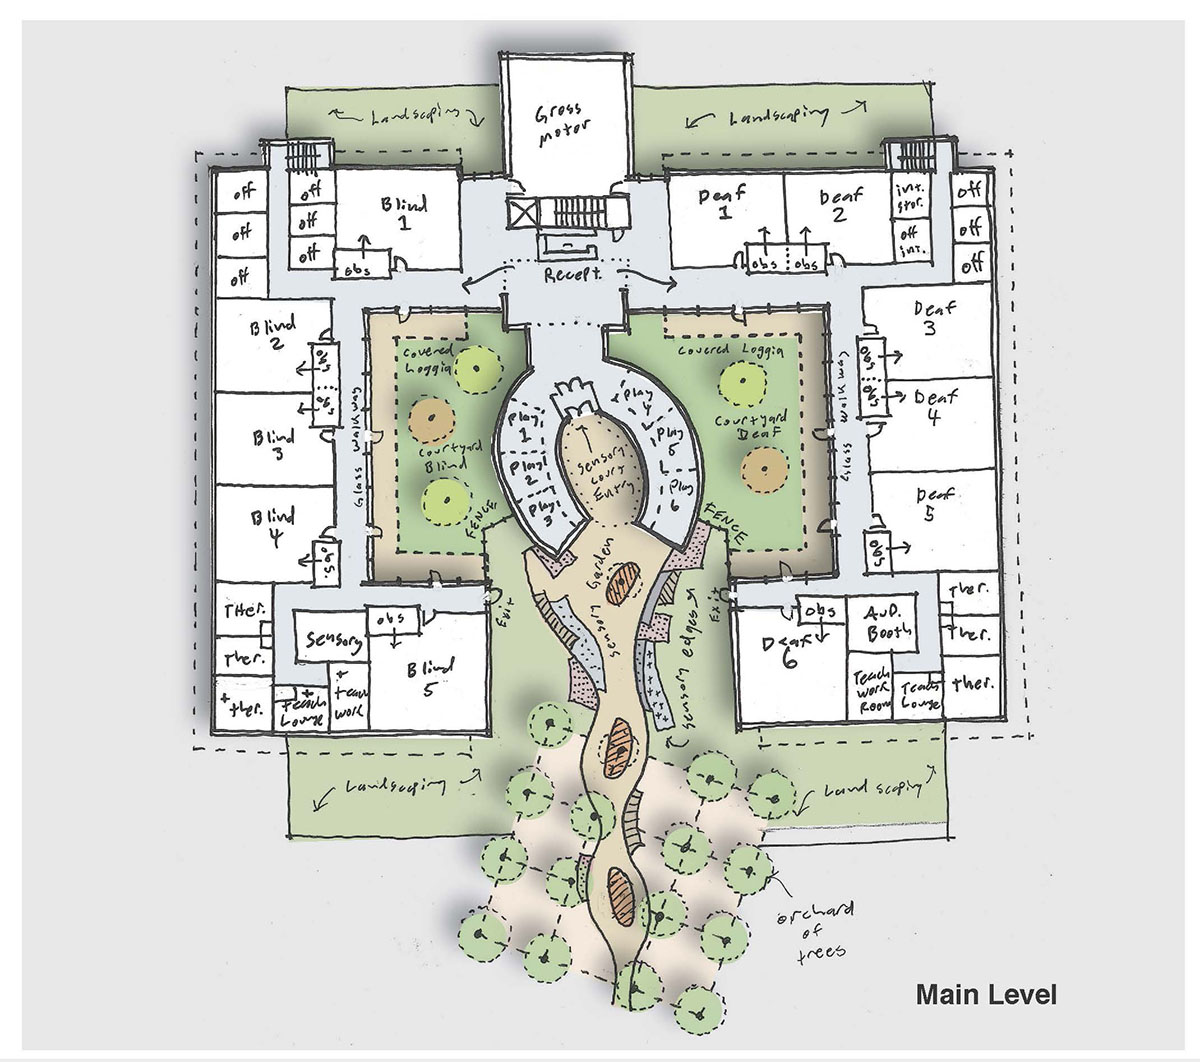 A diagram for the main level of the school for the deaf using elements of sensory design.